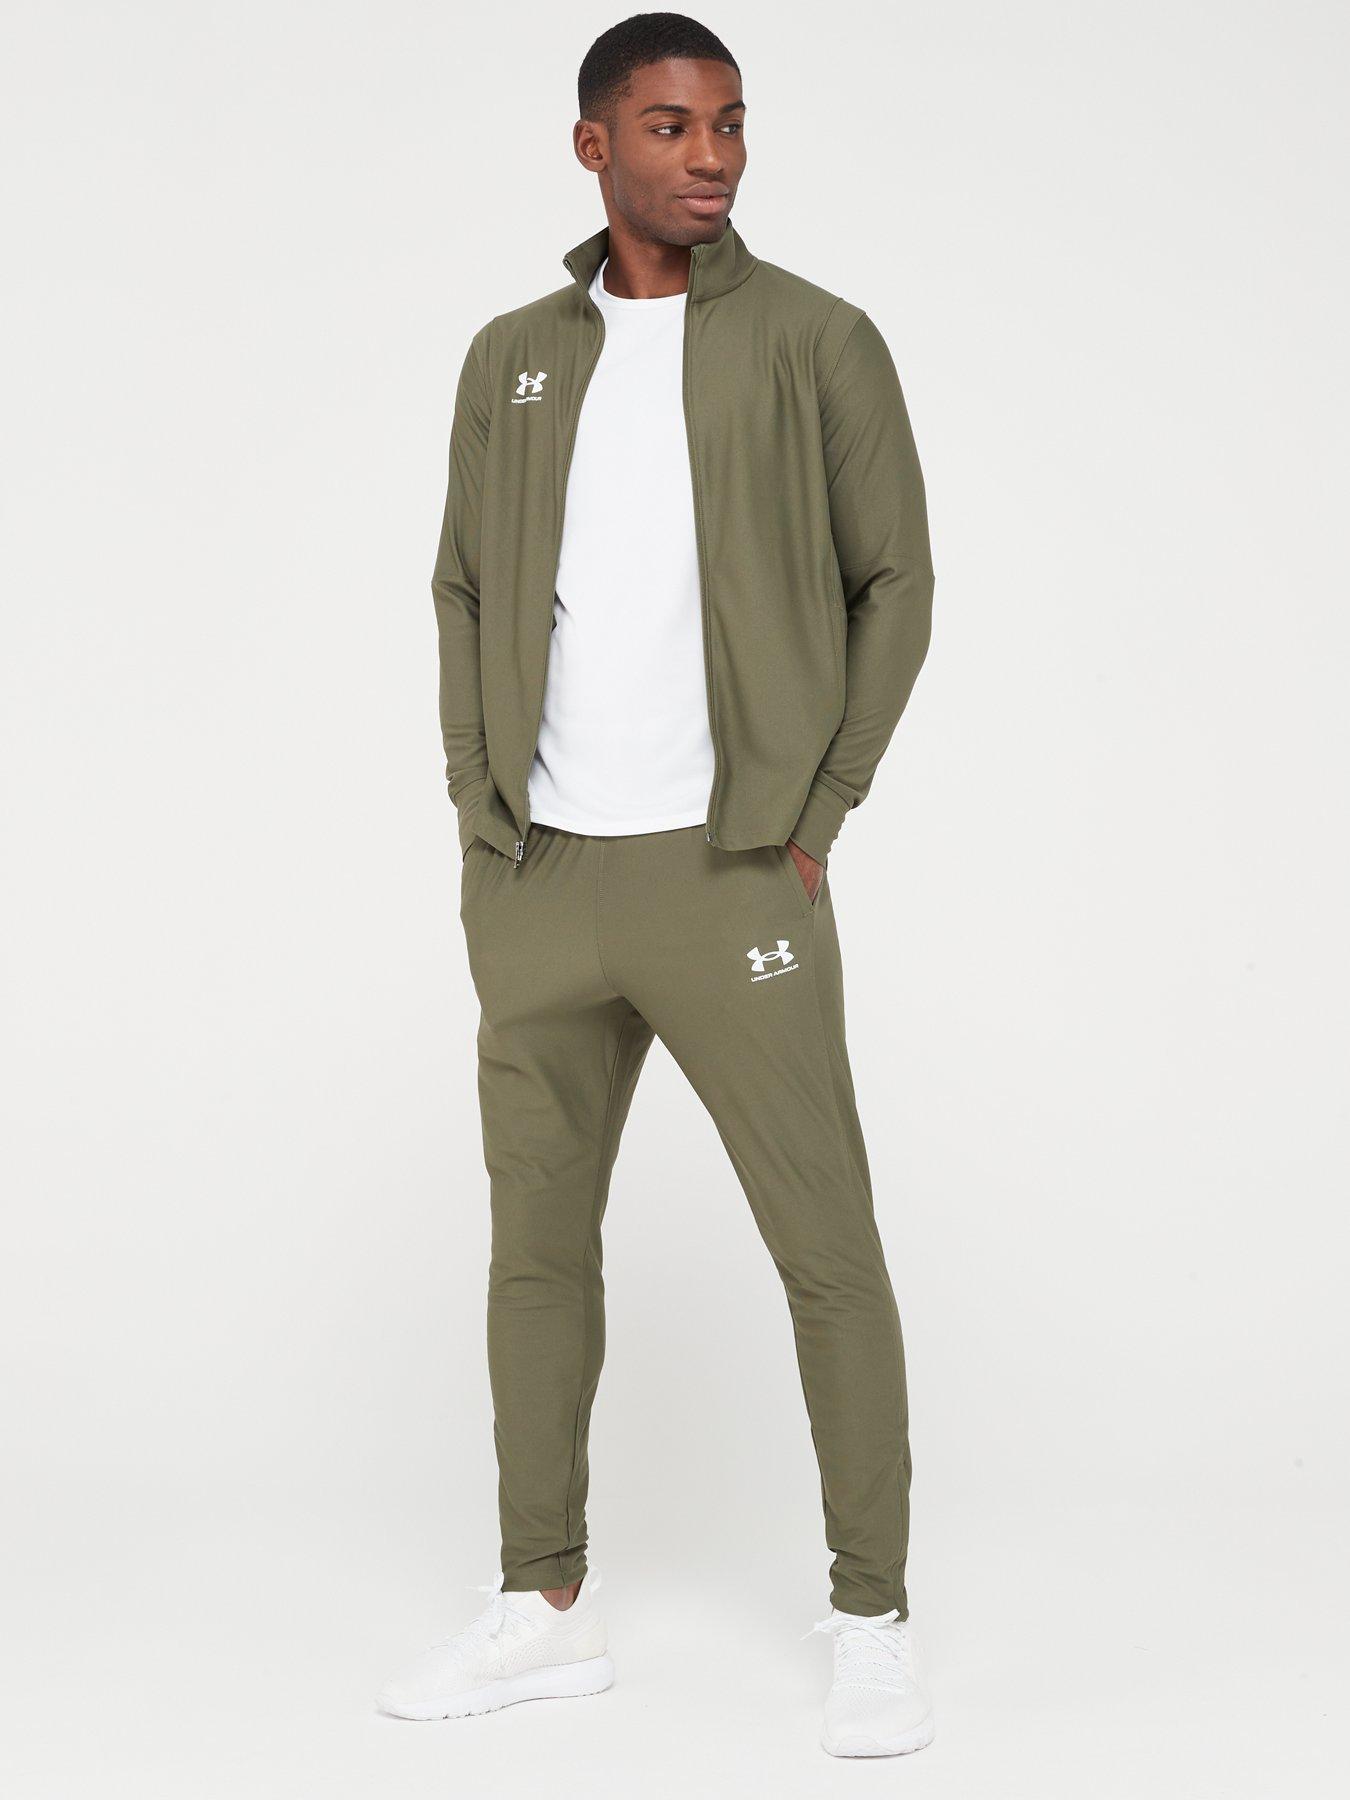 Men's Sports Tracksuits